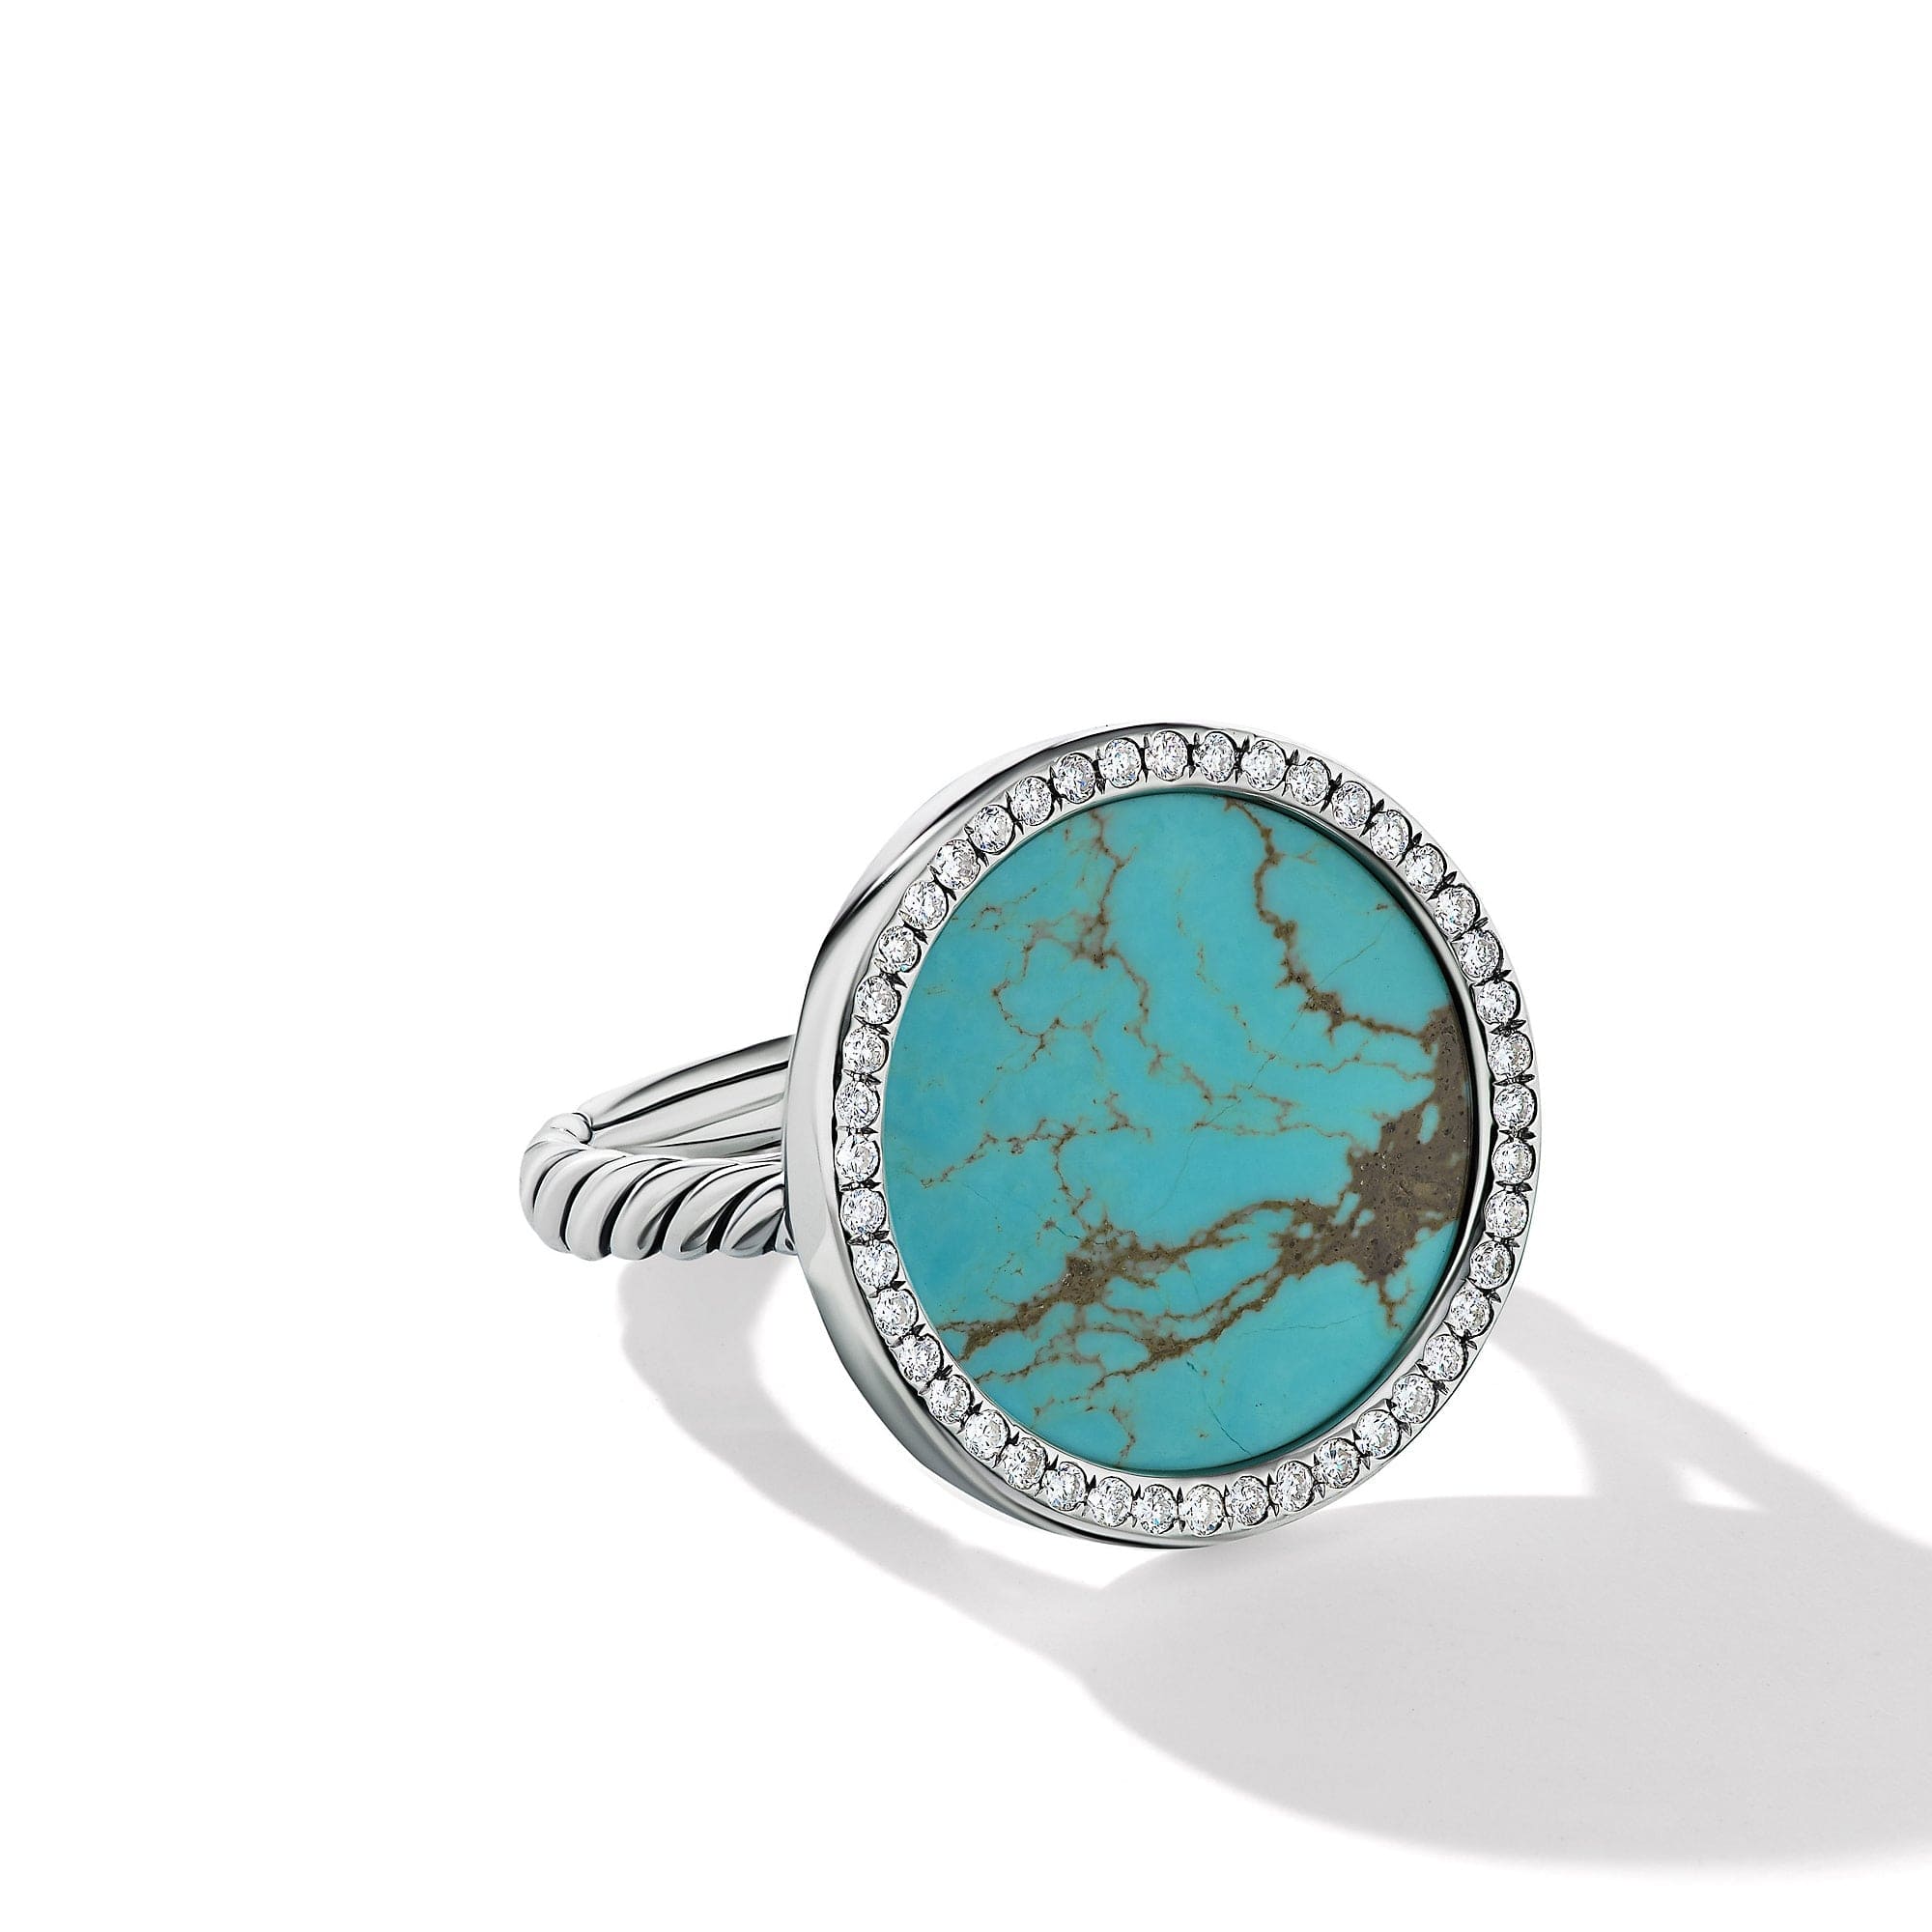 DY Elements Ring with Turquoise and Pavé Diamonds Sterling Silver, Long's Jewelers